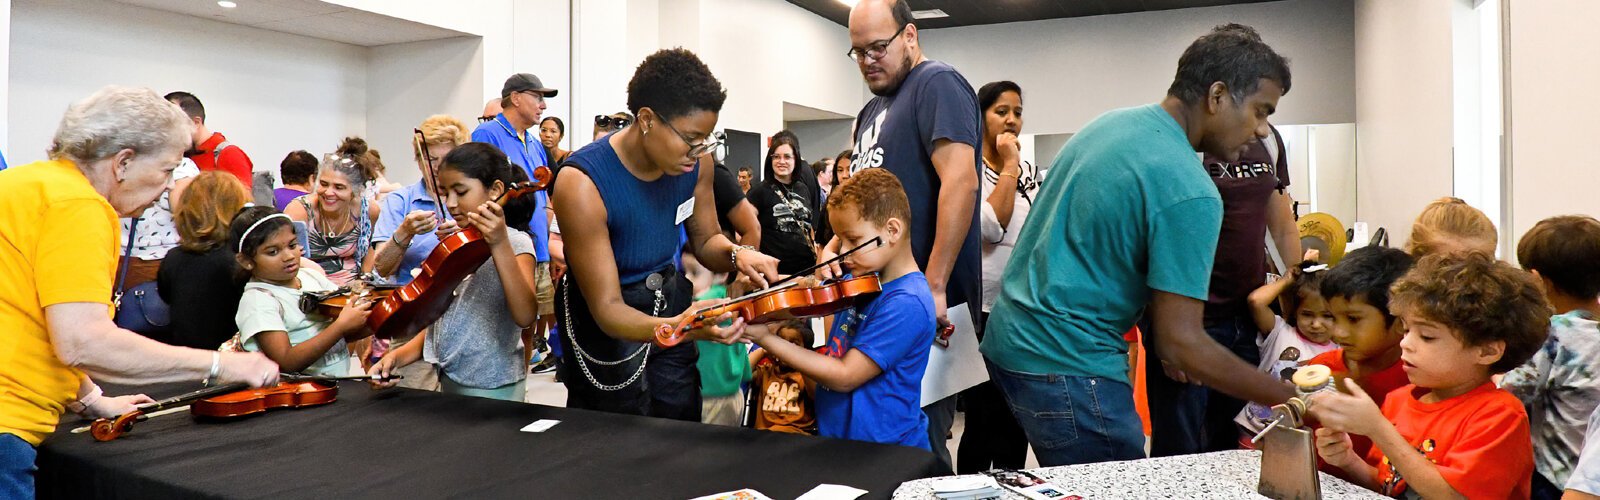 The Florida Orchestra’s Manager of Education and Community Janae Earl shows a child how to handle a violin at The Florida Orchestra’s well attended “Petting Zoo."